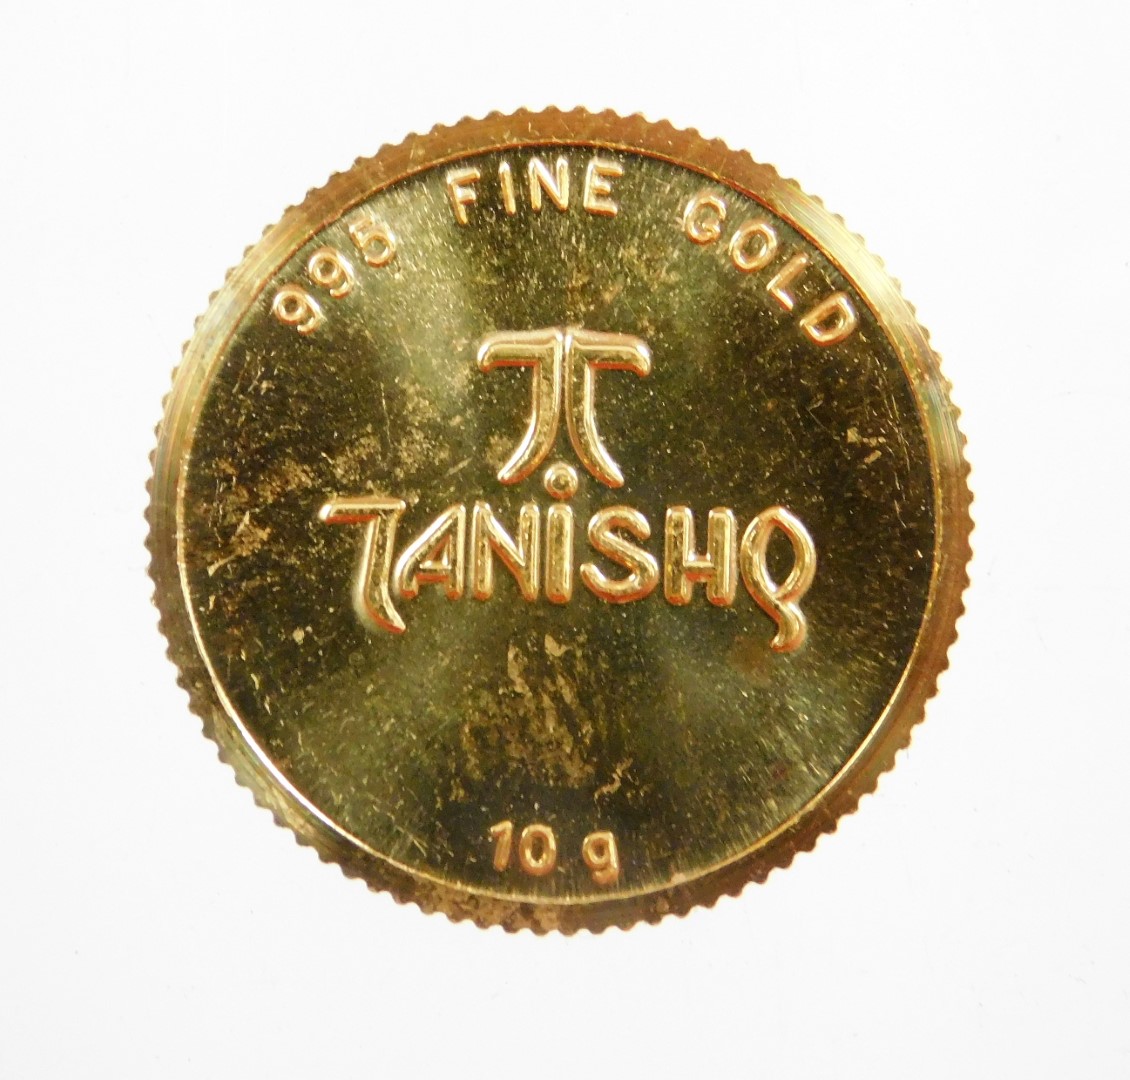 A Tanishq gold coin, depicting two Hindu figures, stamped 995 fine gold, 10g, in presentation sleeve - Image 2 of 3